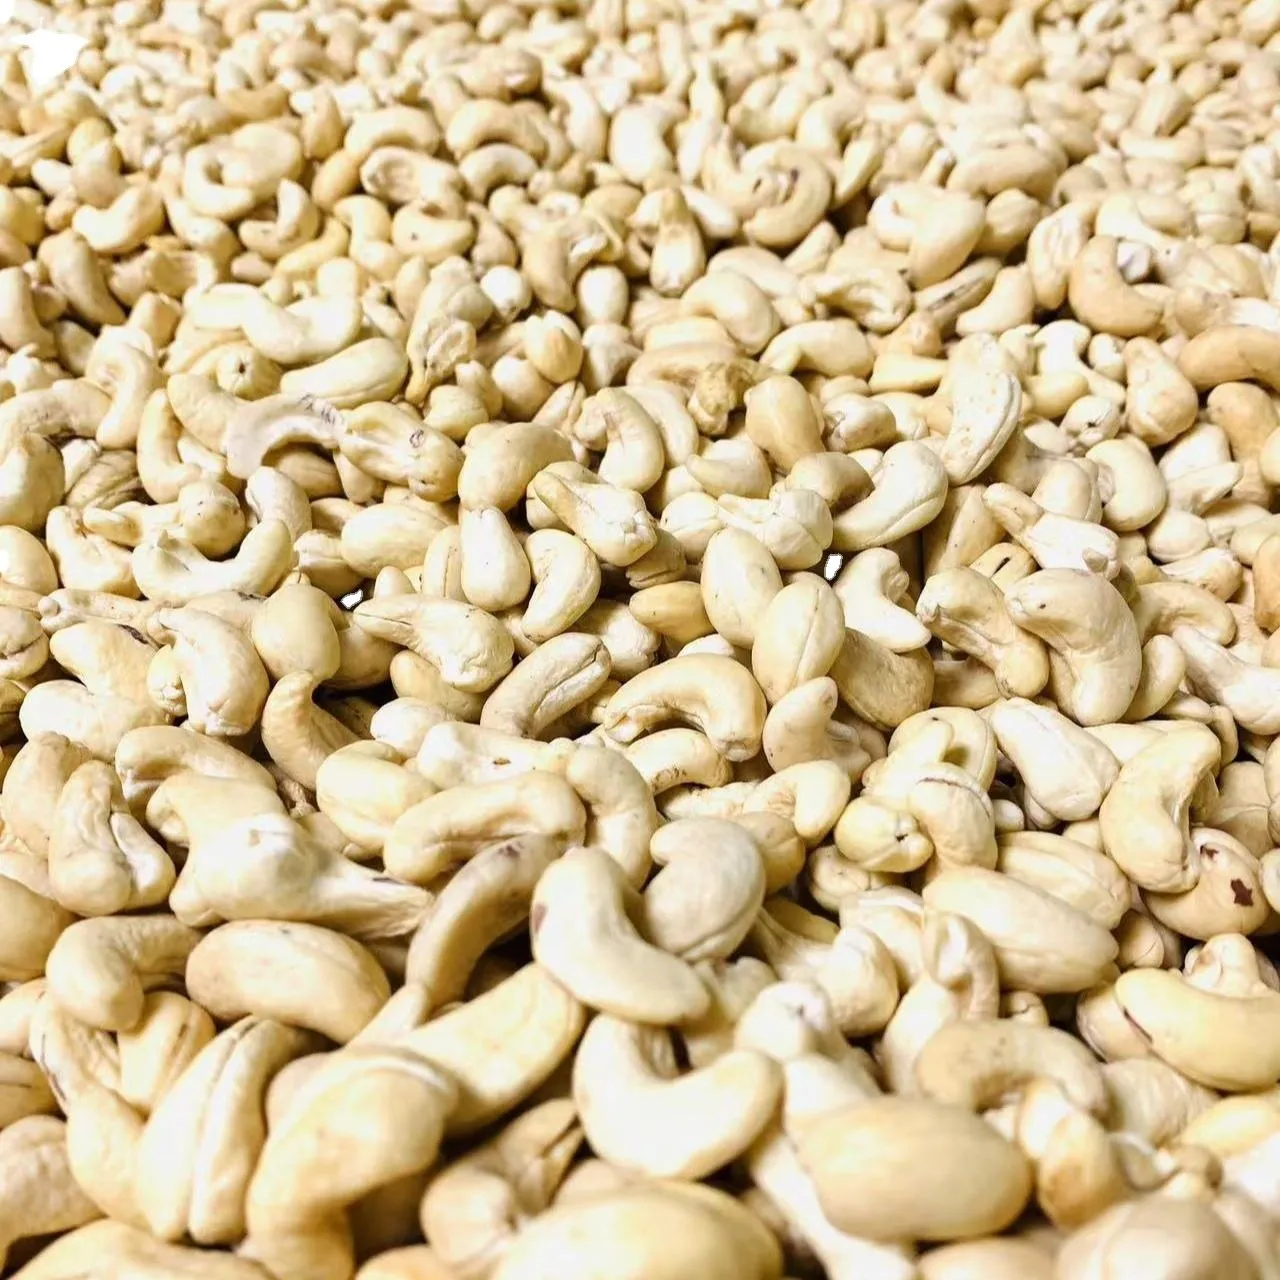 The purchase price of cashew nuts wholesale dealers in Mumbai